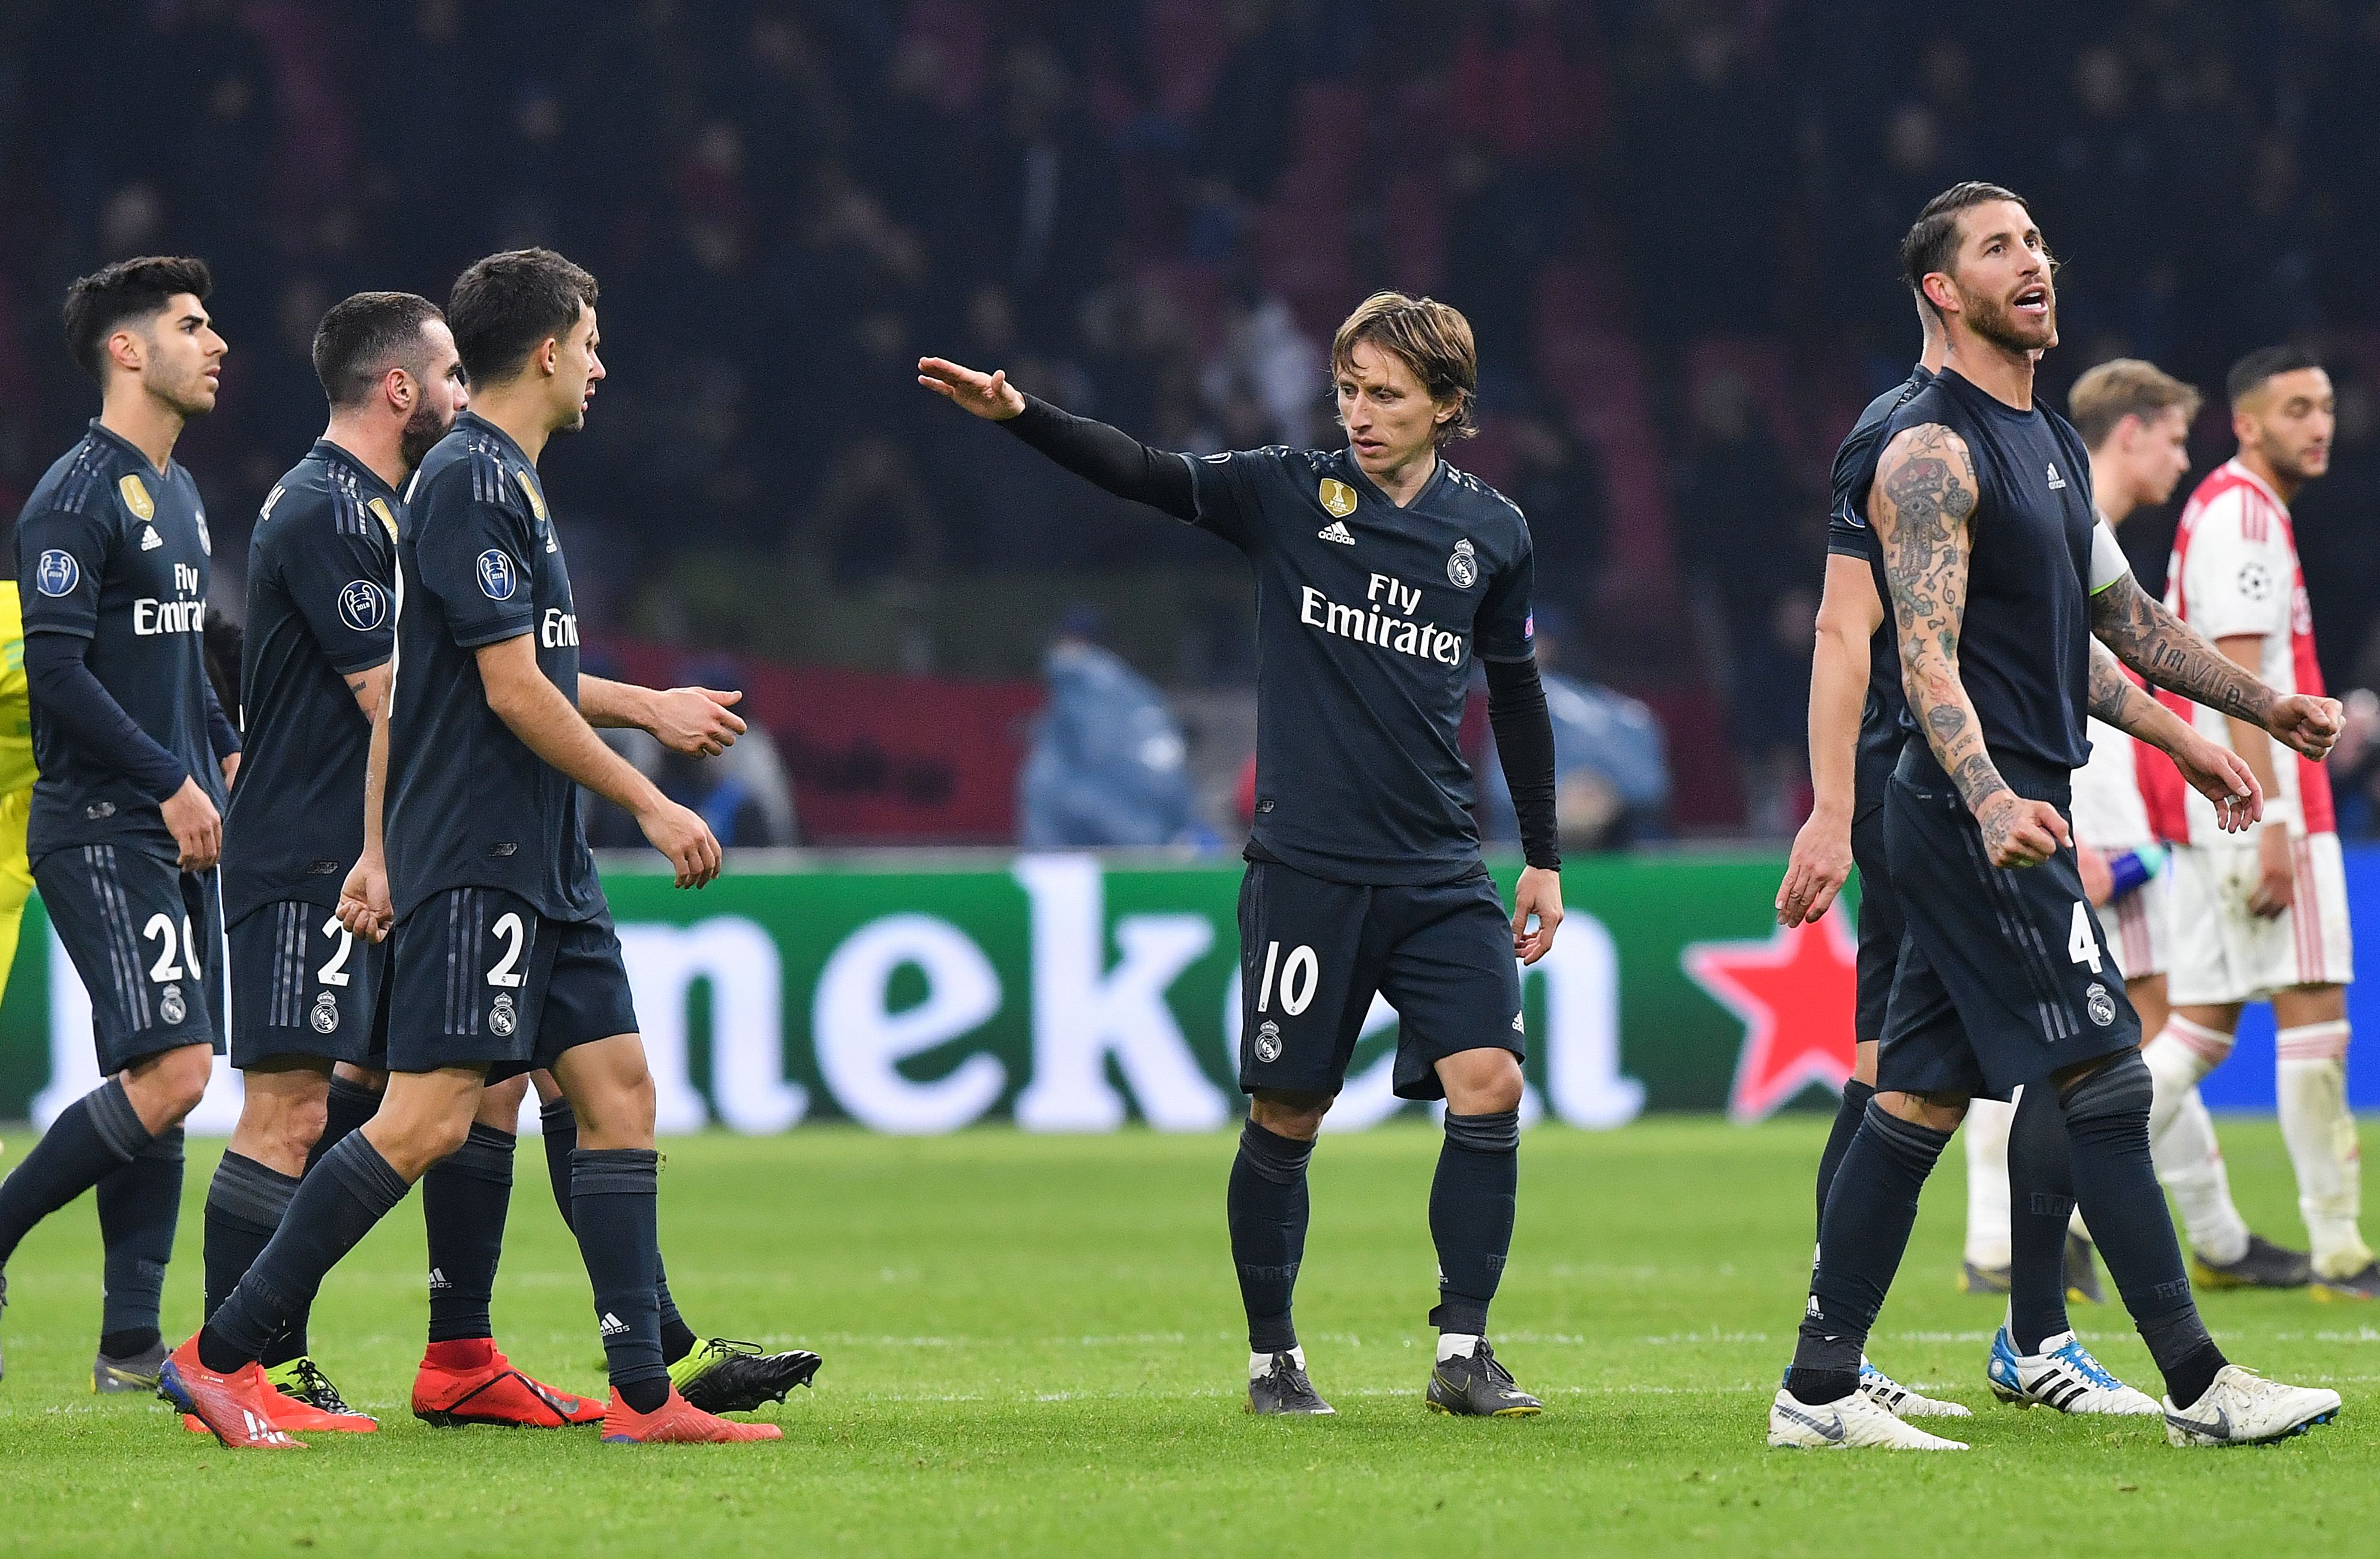 Real Madrid's Luka Modric (C) celebrates with teammates during the UEFA Champions league round of 16 first leg football match between Ajax Amsterdam and Real Madrid at the Johan Cruijff ArenA on February 13, 2019. (Photo by EMMANUEL DUNAND / AFP)        (Photo credit should read EMMANUEL DUNAND/AFP/Getty Images)